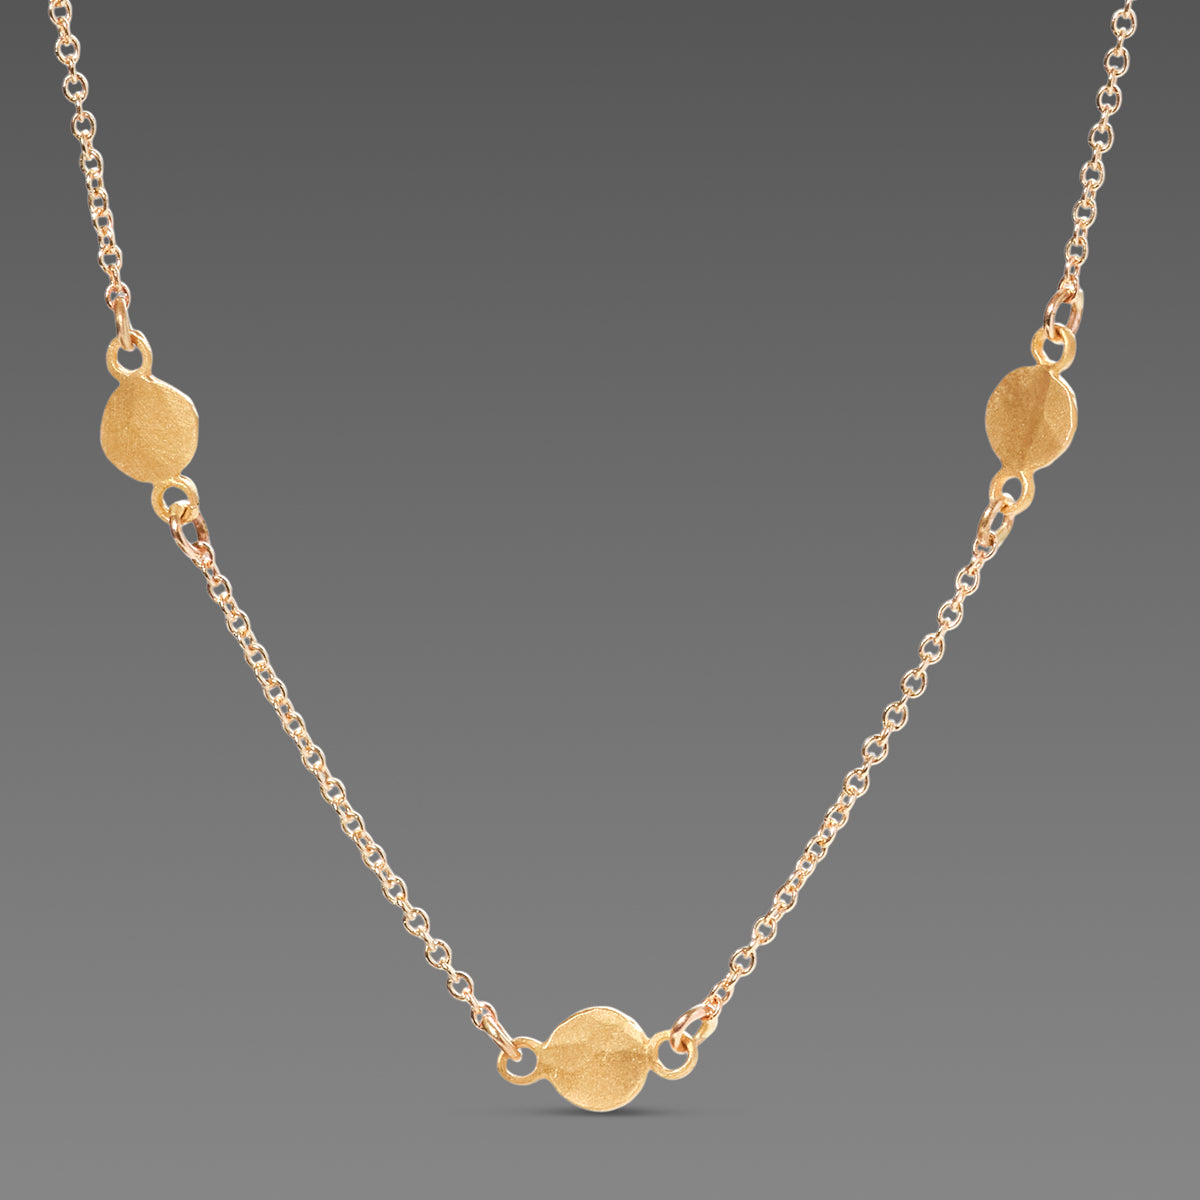 ALL TOGETHER Delicate Gold Chain Necklace - HENRI LOU DESIGNS